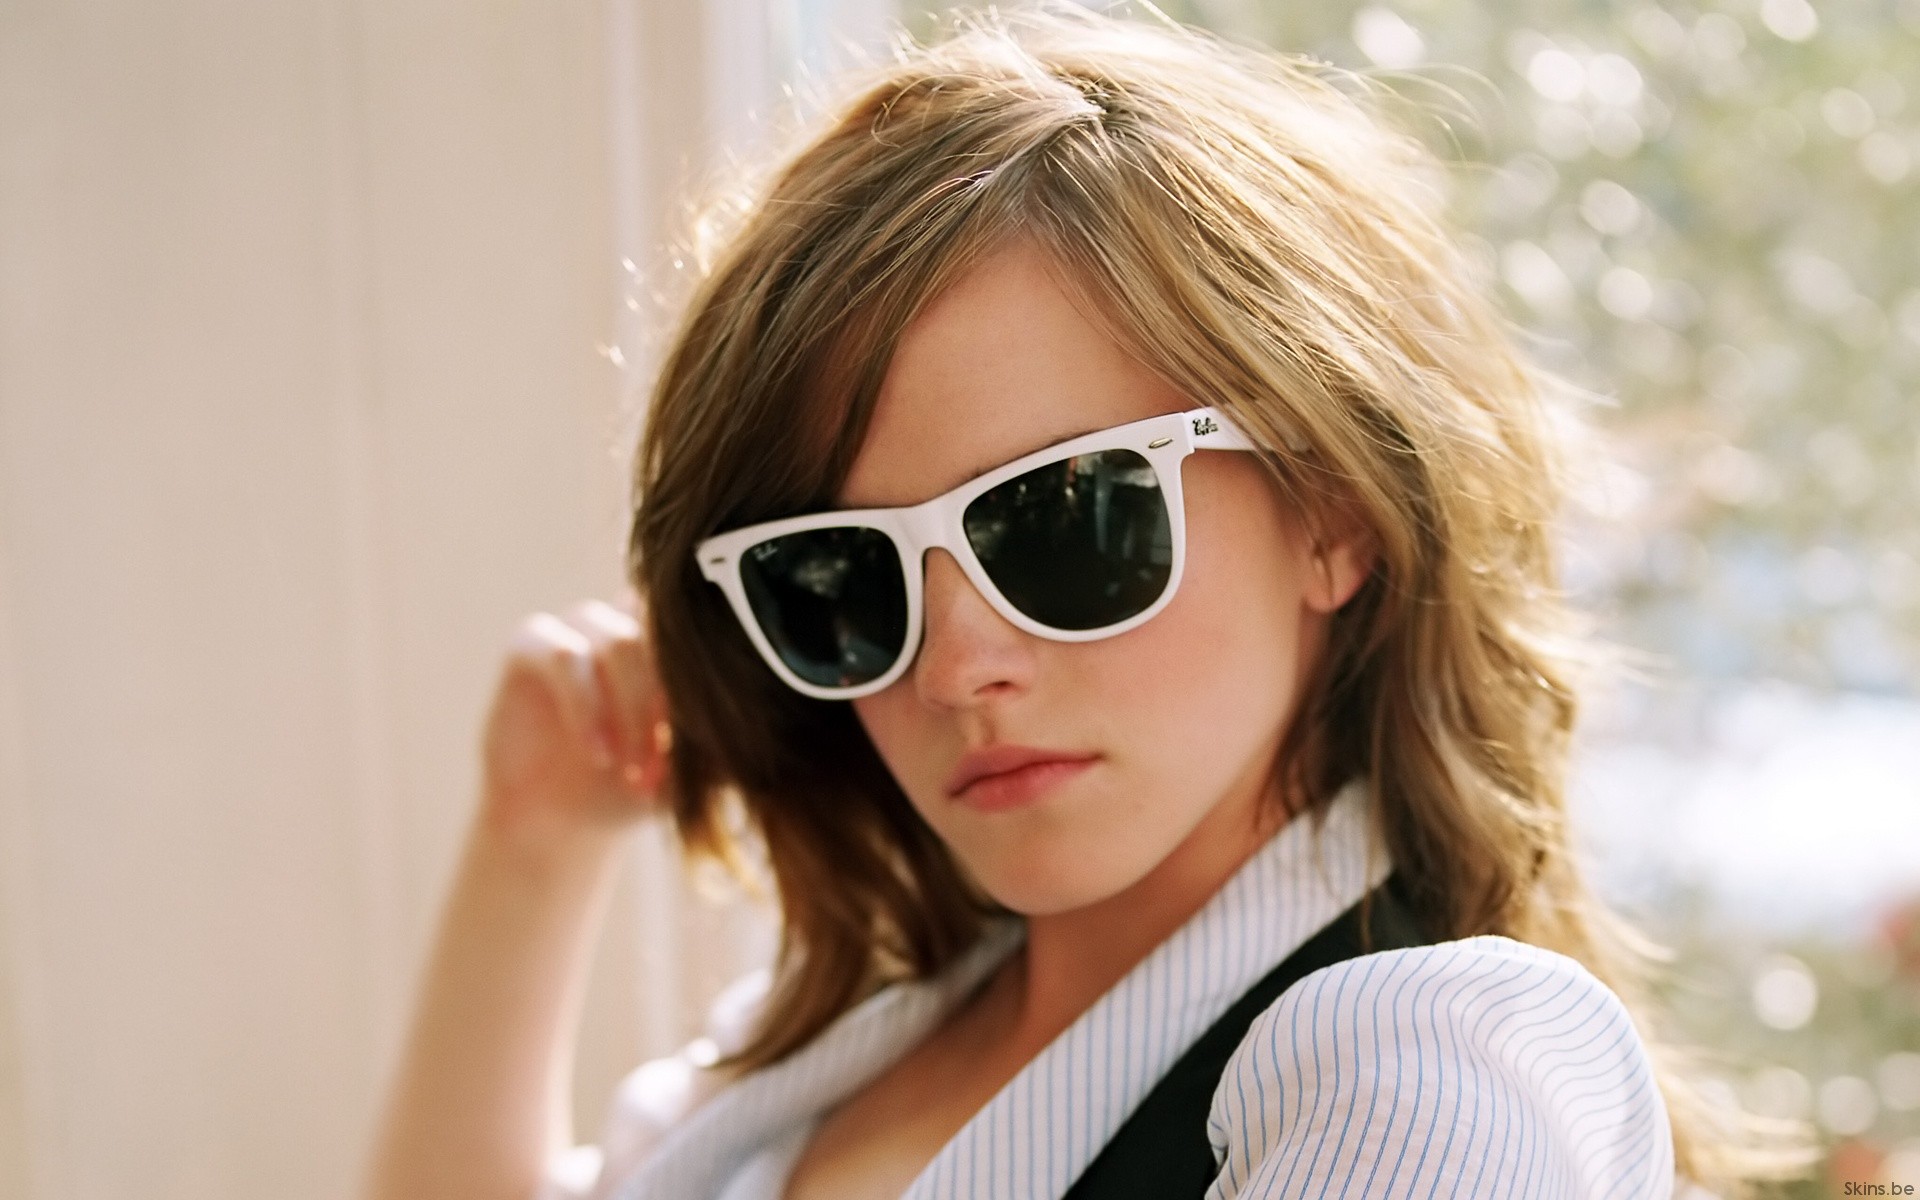 Emma Watson Sunglasses Blonde Face Women With Glasses Actress Celebrity Ray Ban 1920x1200